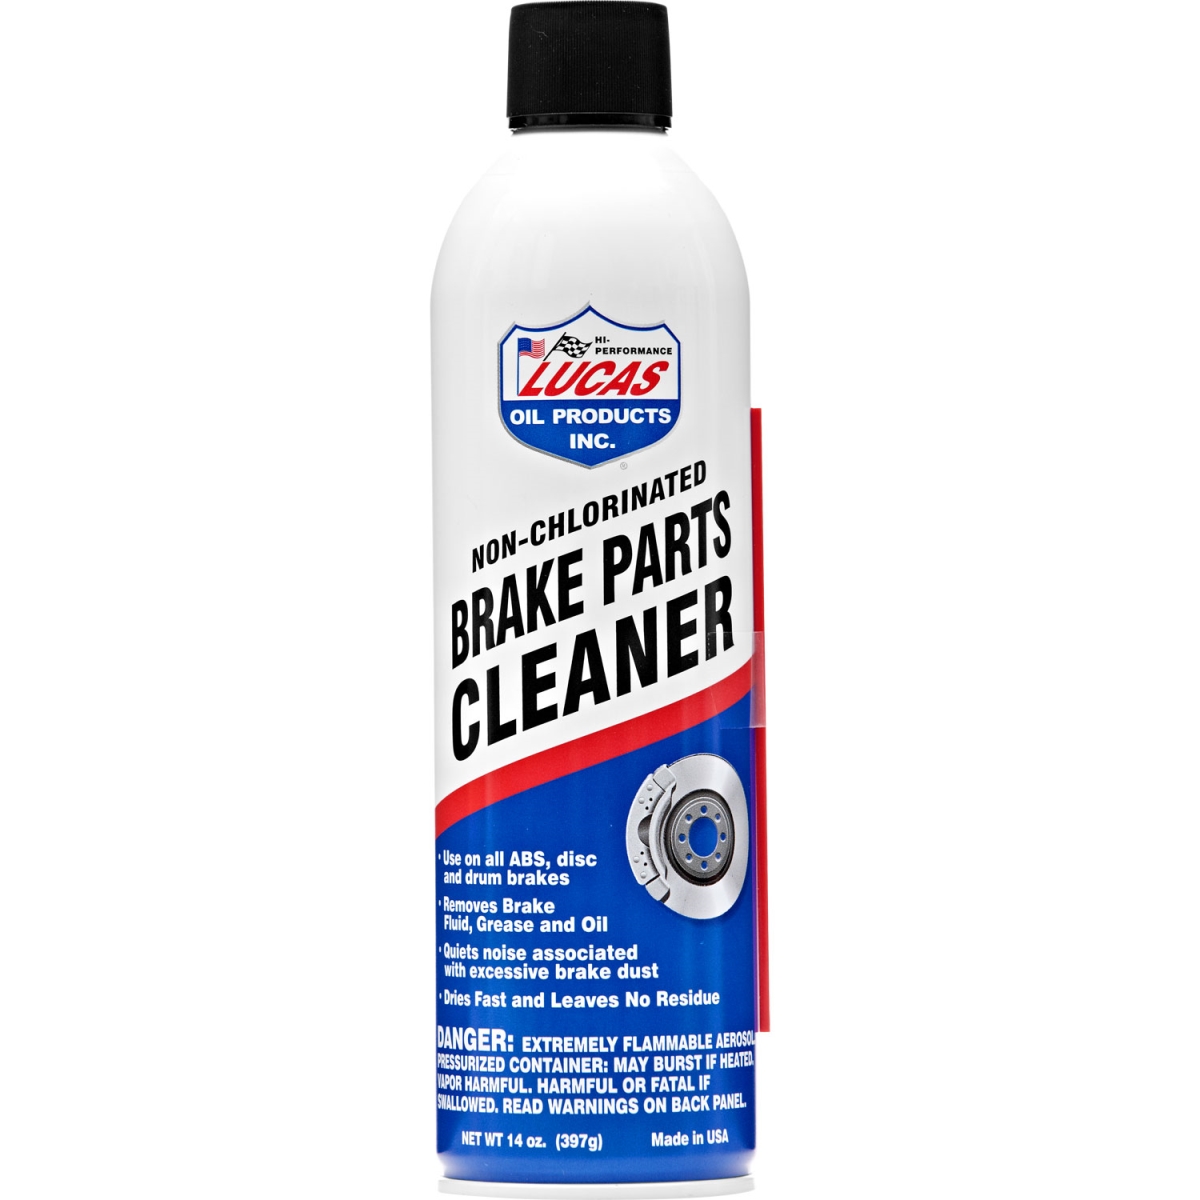 L44-10906 14 Oz Non-chlorinated Brake Parts Cleaner